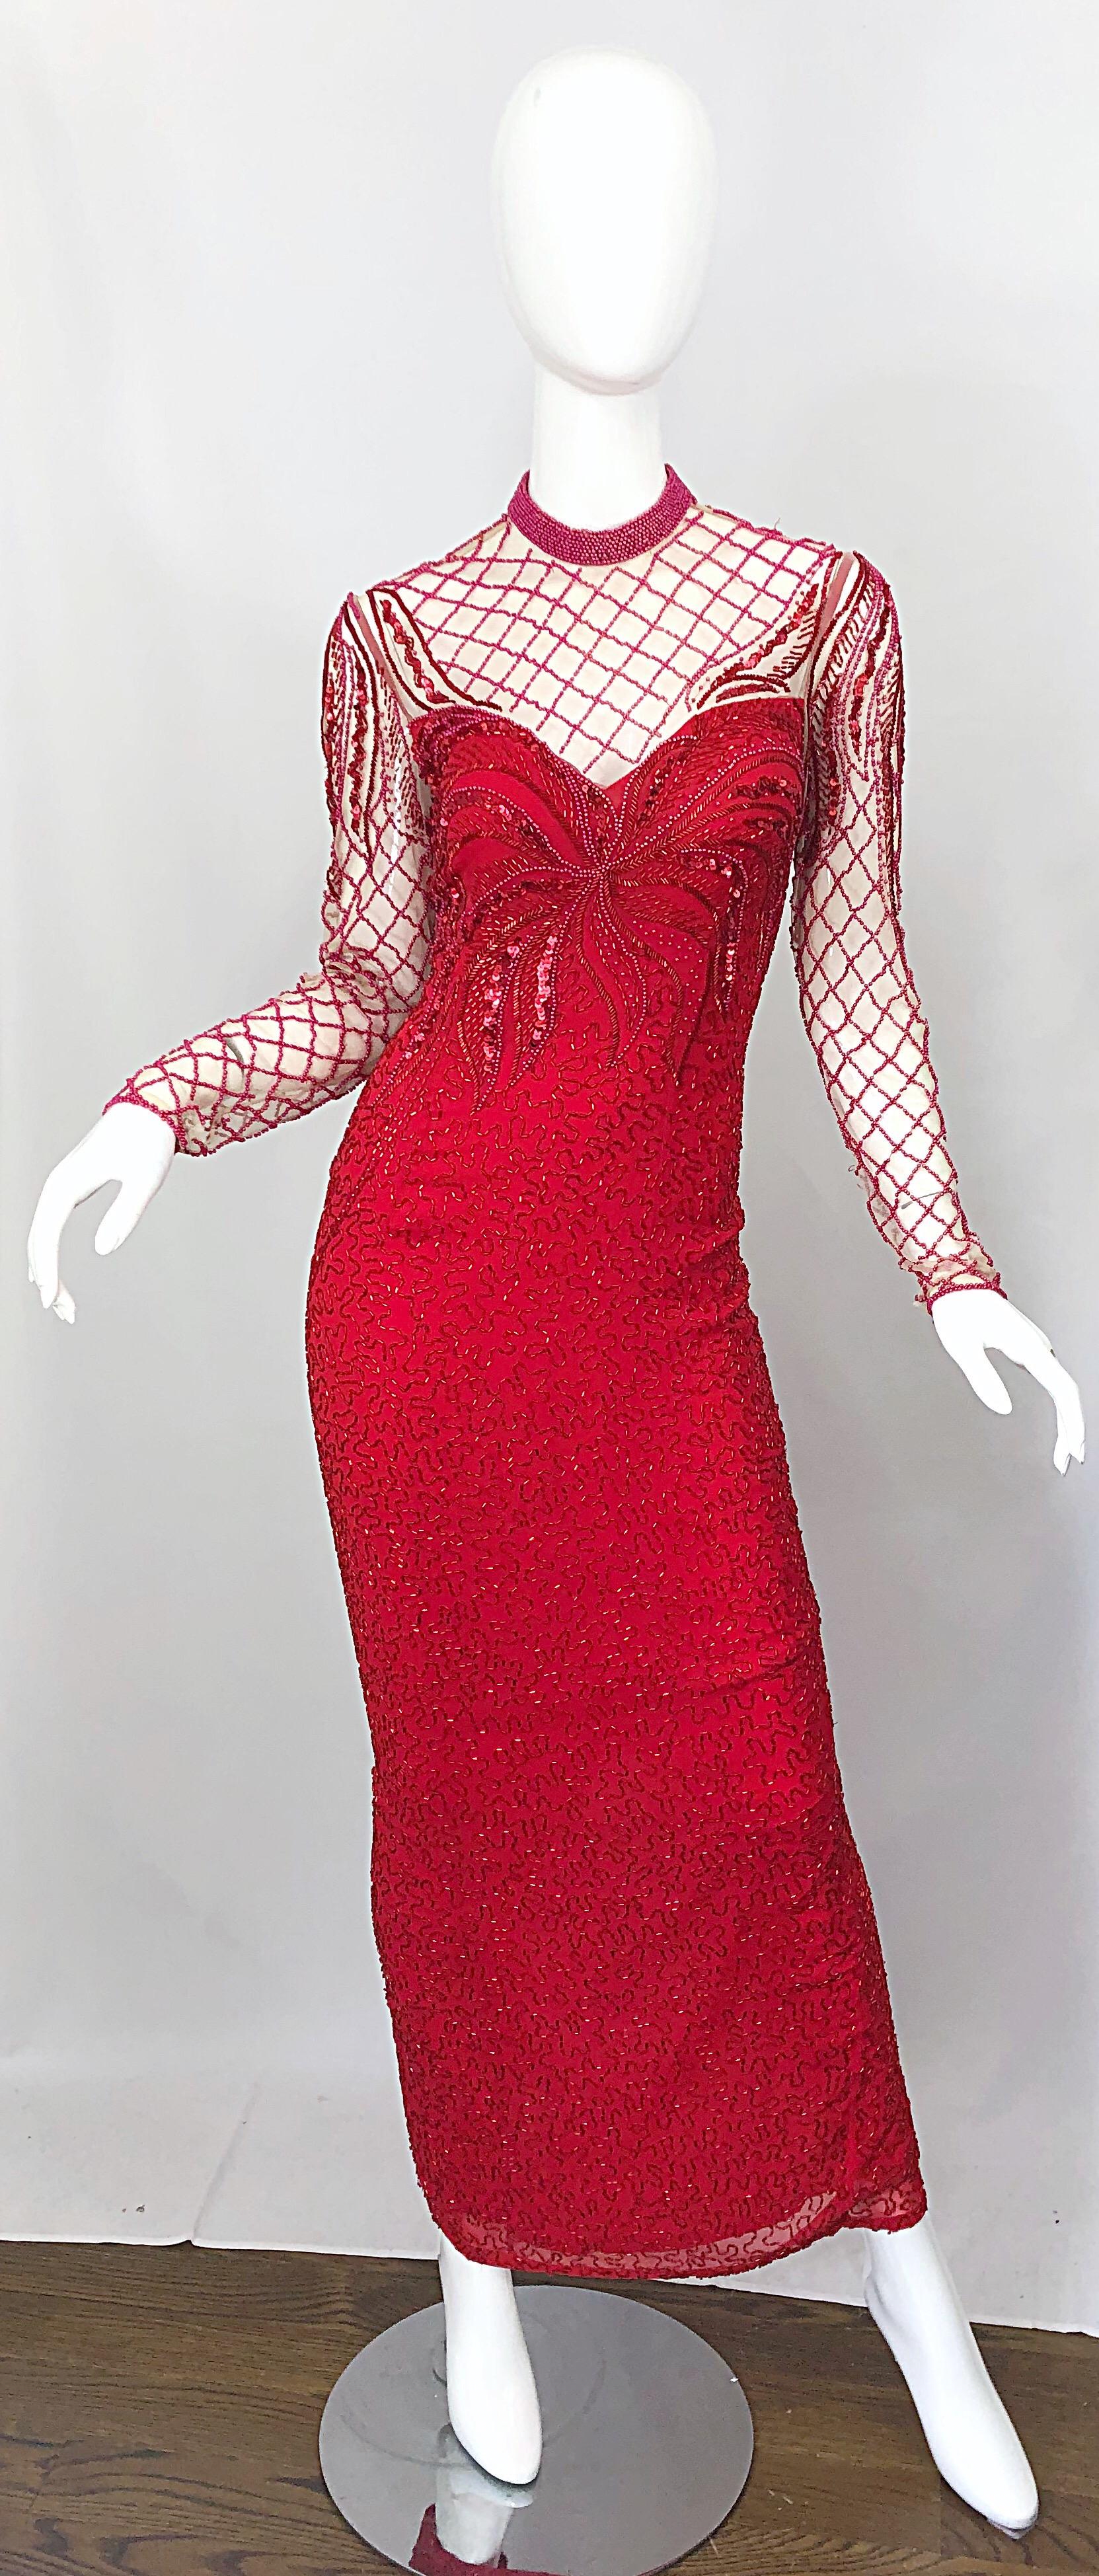 Vintage Oleg Cassini 1990s Lipstick Red Beaded Silk Chiffon 90s Evening Gown For Sale 3